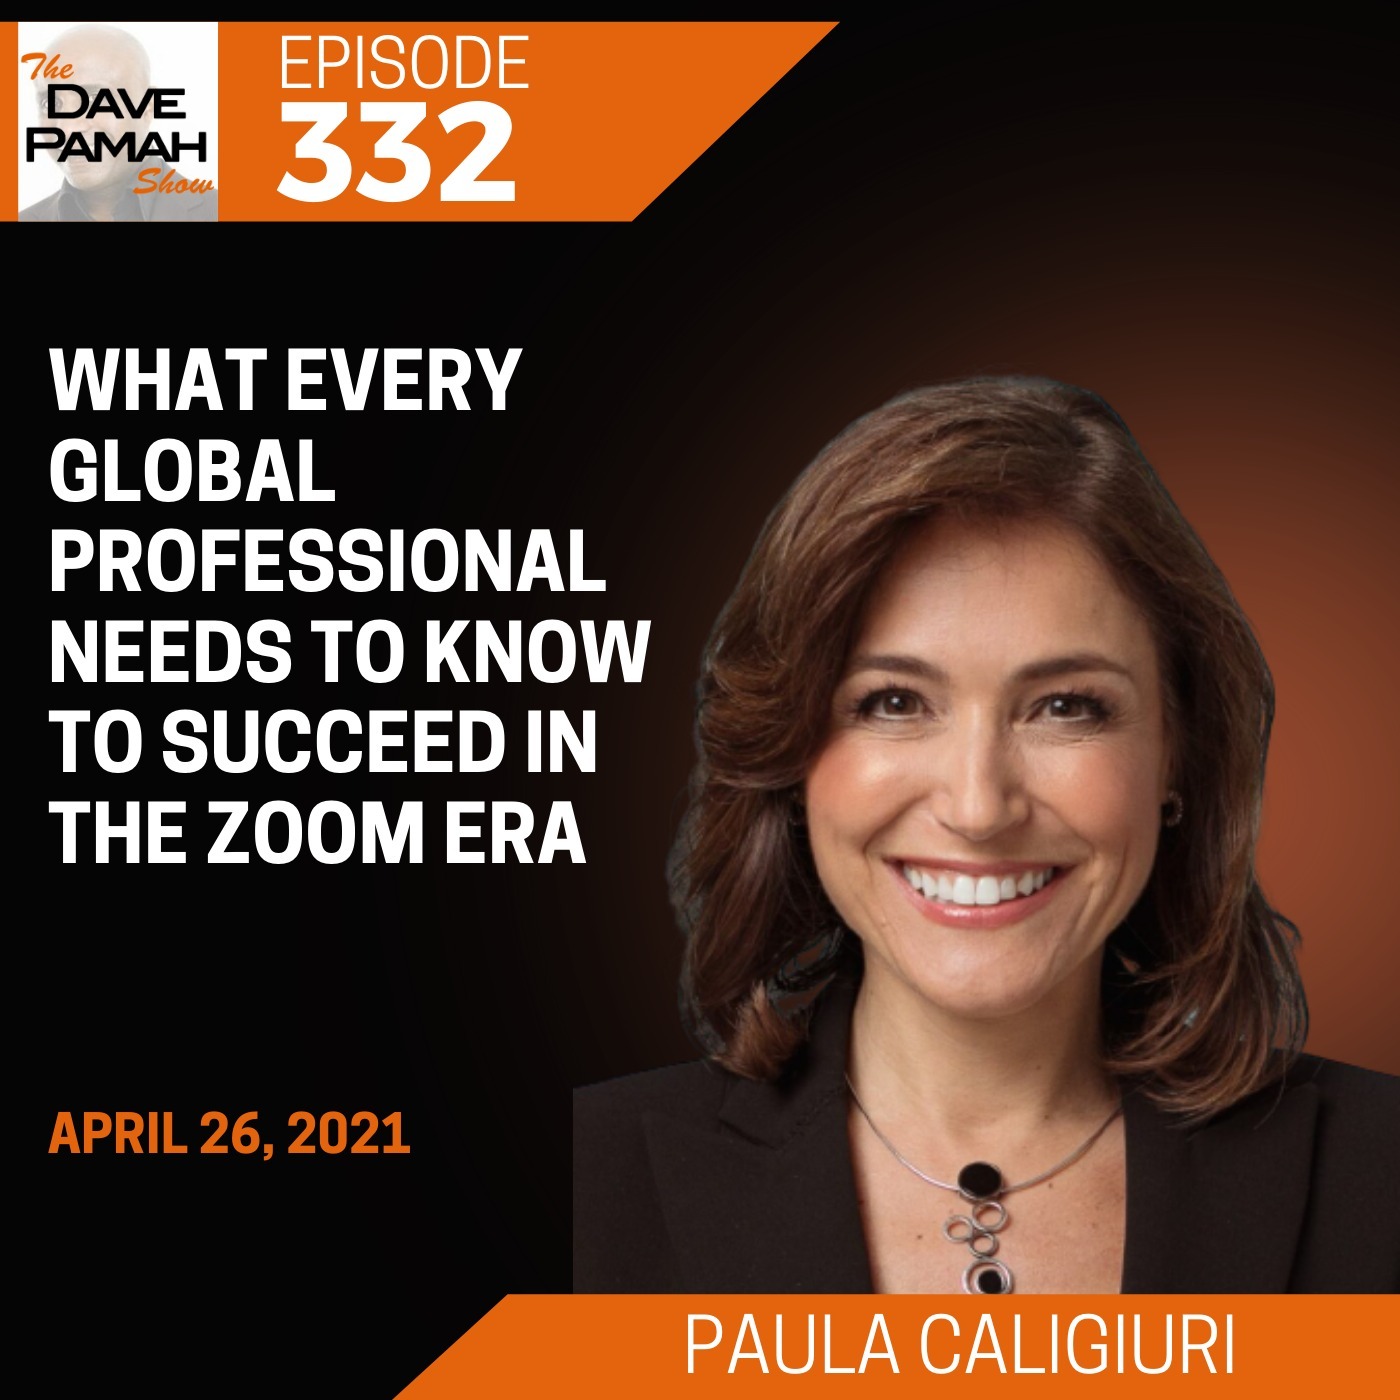 What Every Global Professional Needs to Know to Succeed in the Zoom Era with Paula Caligiuri Image